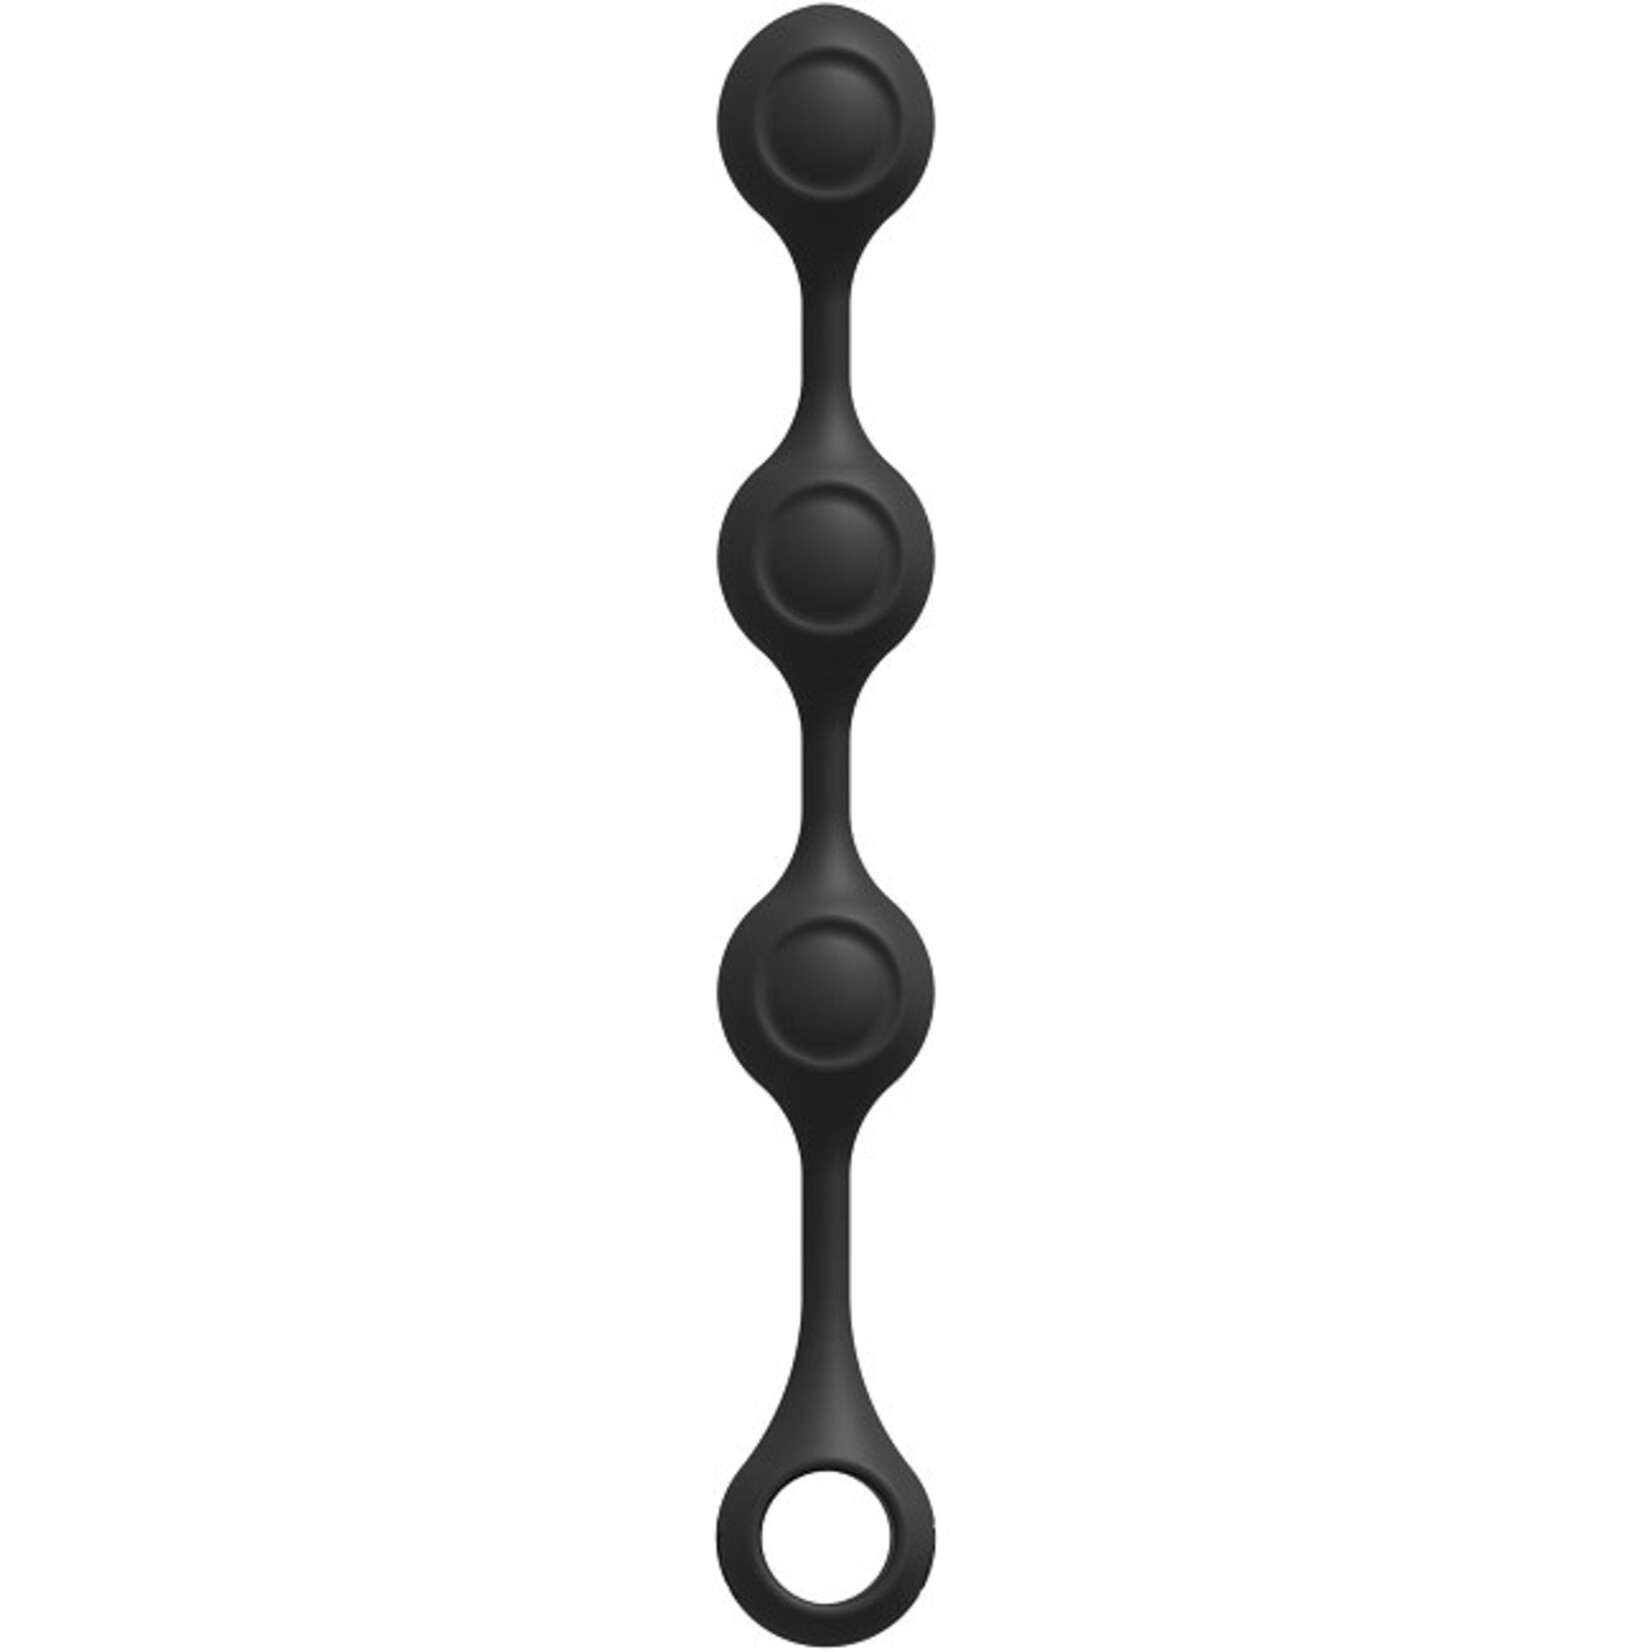 Doc Johnson KINK - Anal Essentials Weighted Silicone Anal Balls 13.5"